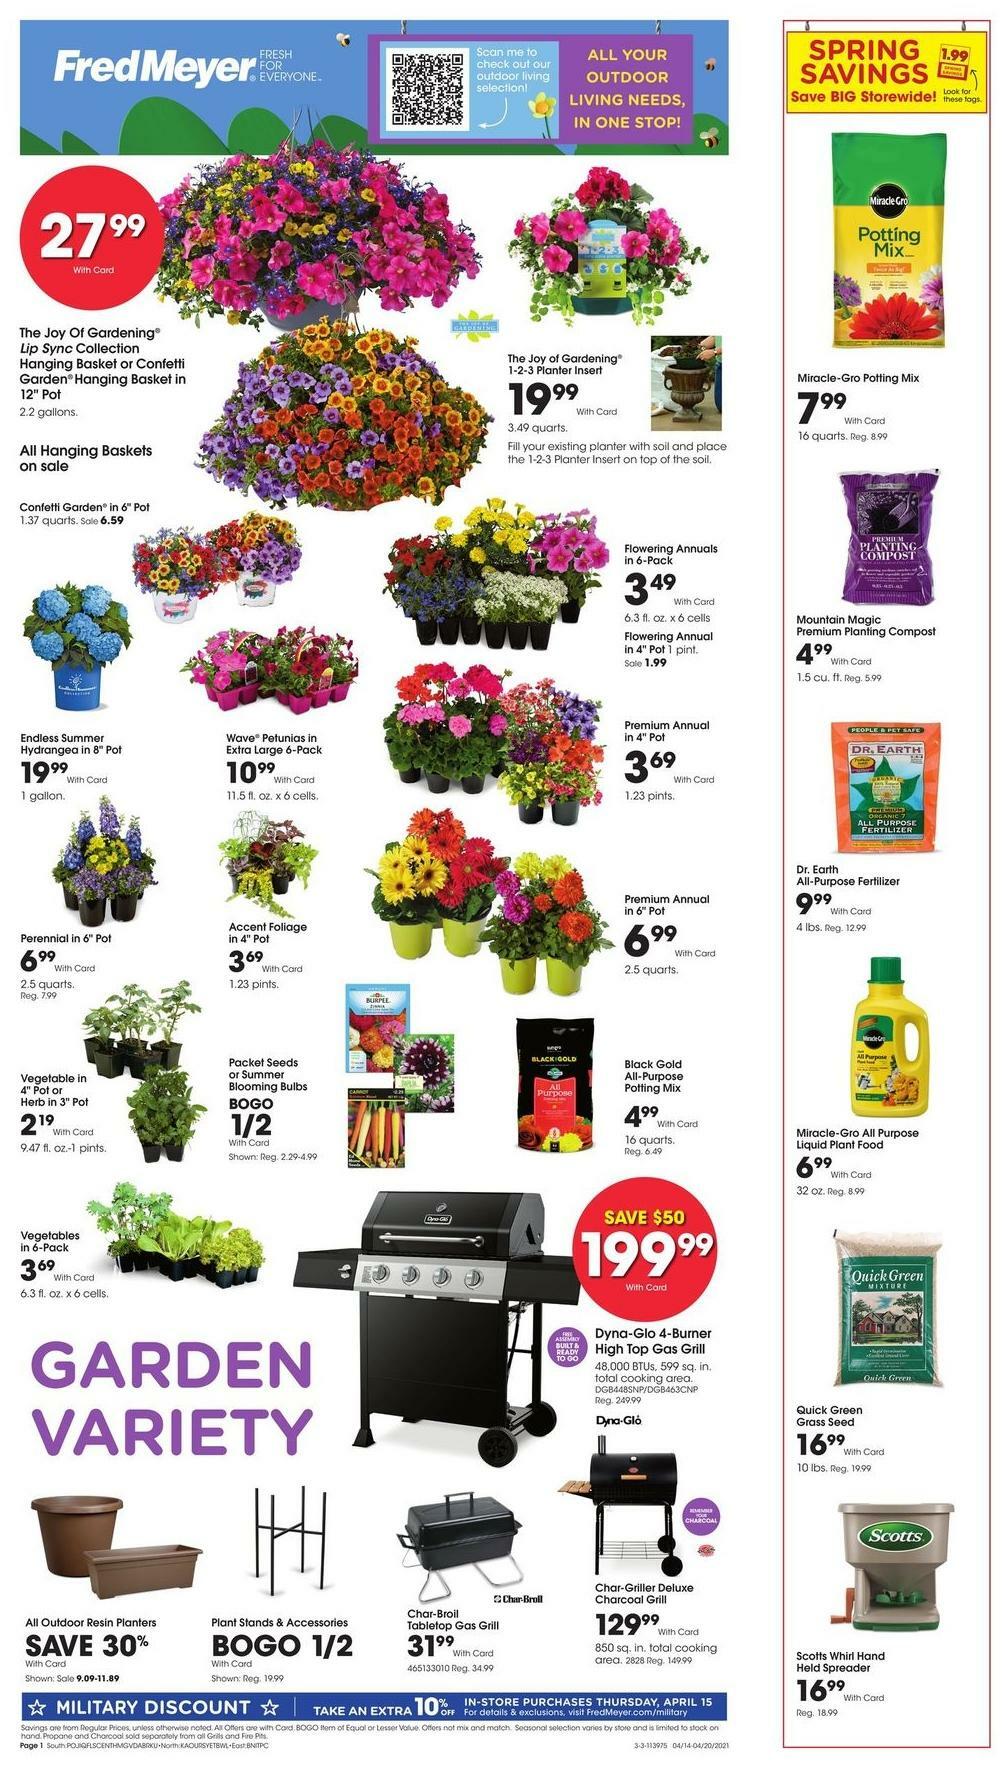 Fred Meyer Garden Weekly Ad & Specials from April 14